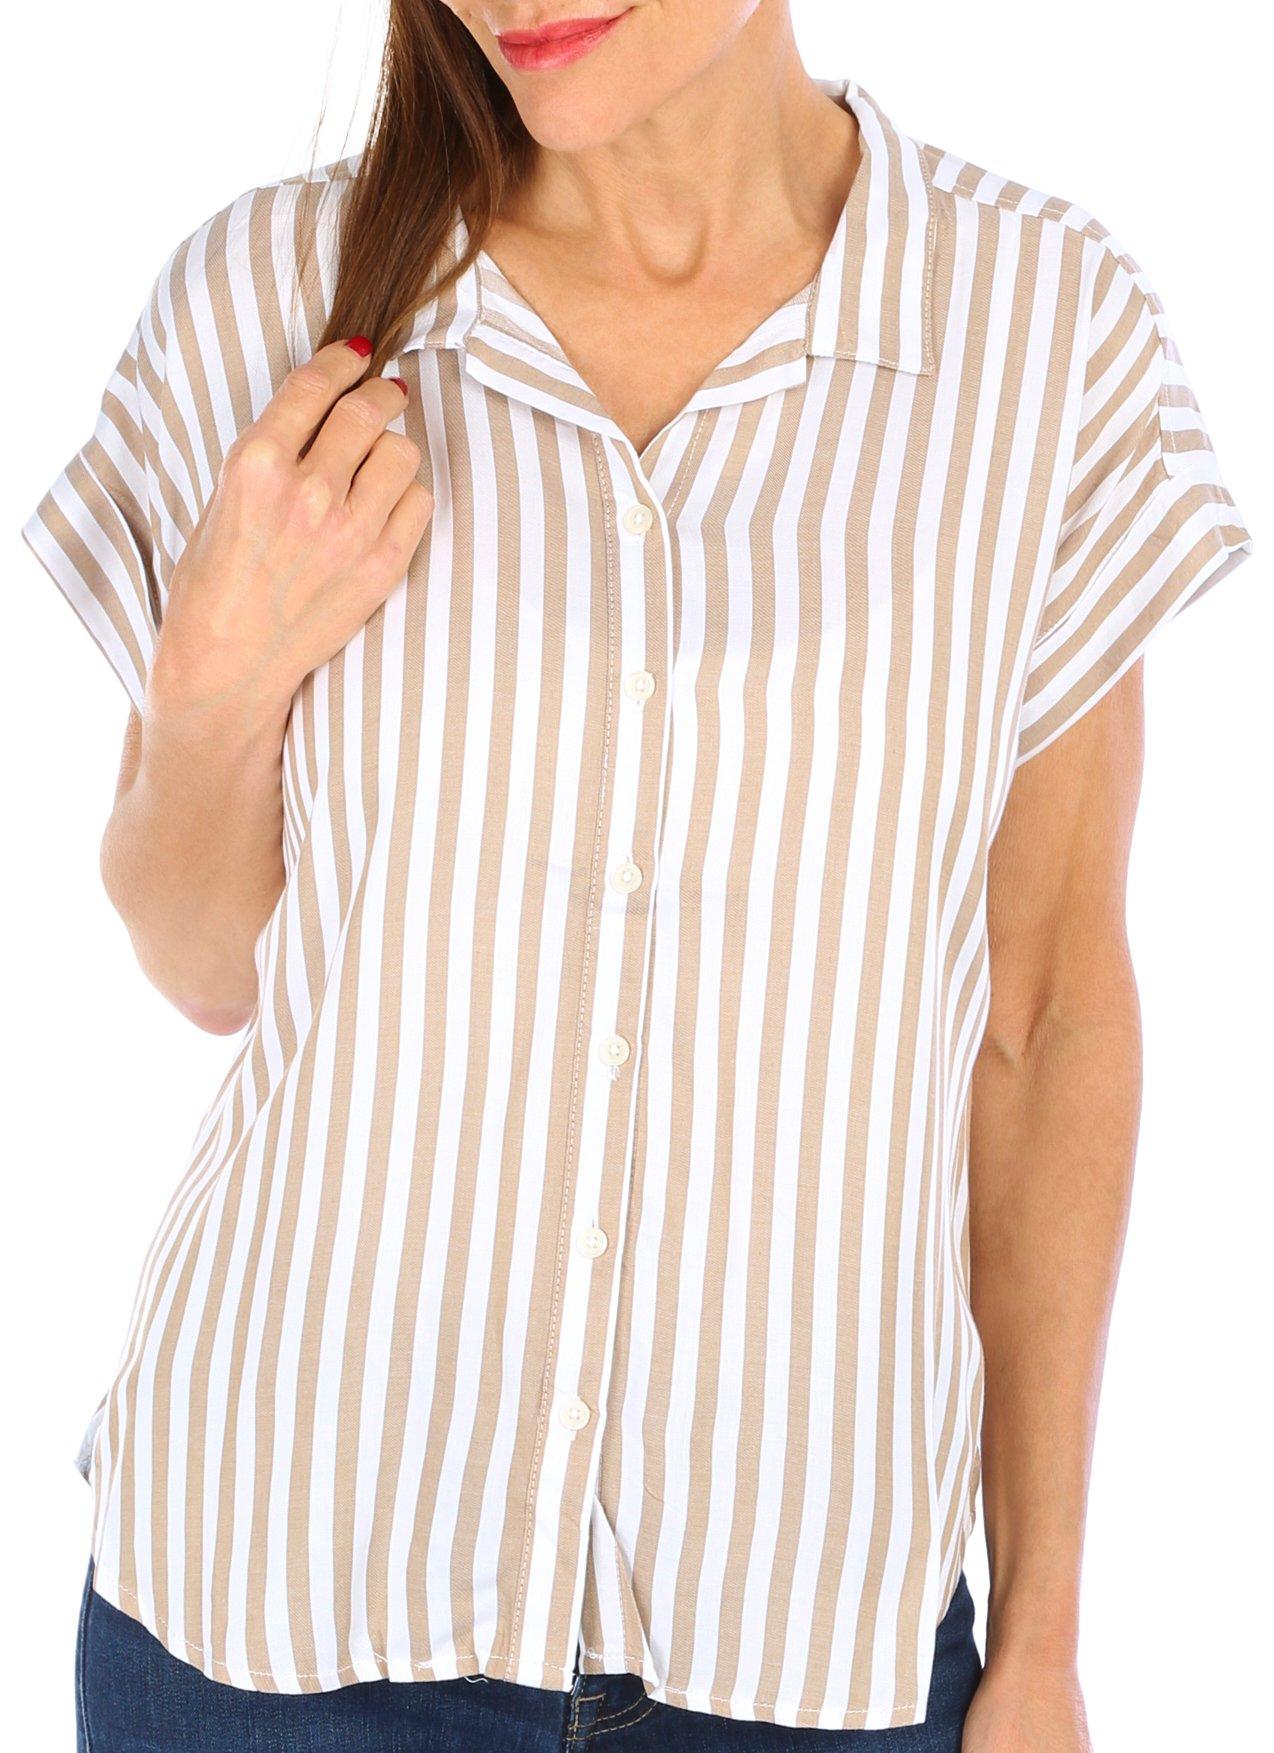 Womens Striped Button Down Short Sleeve Top